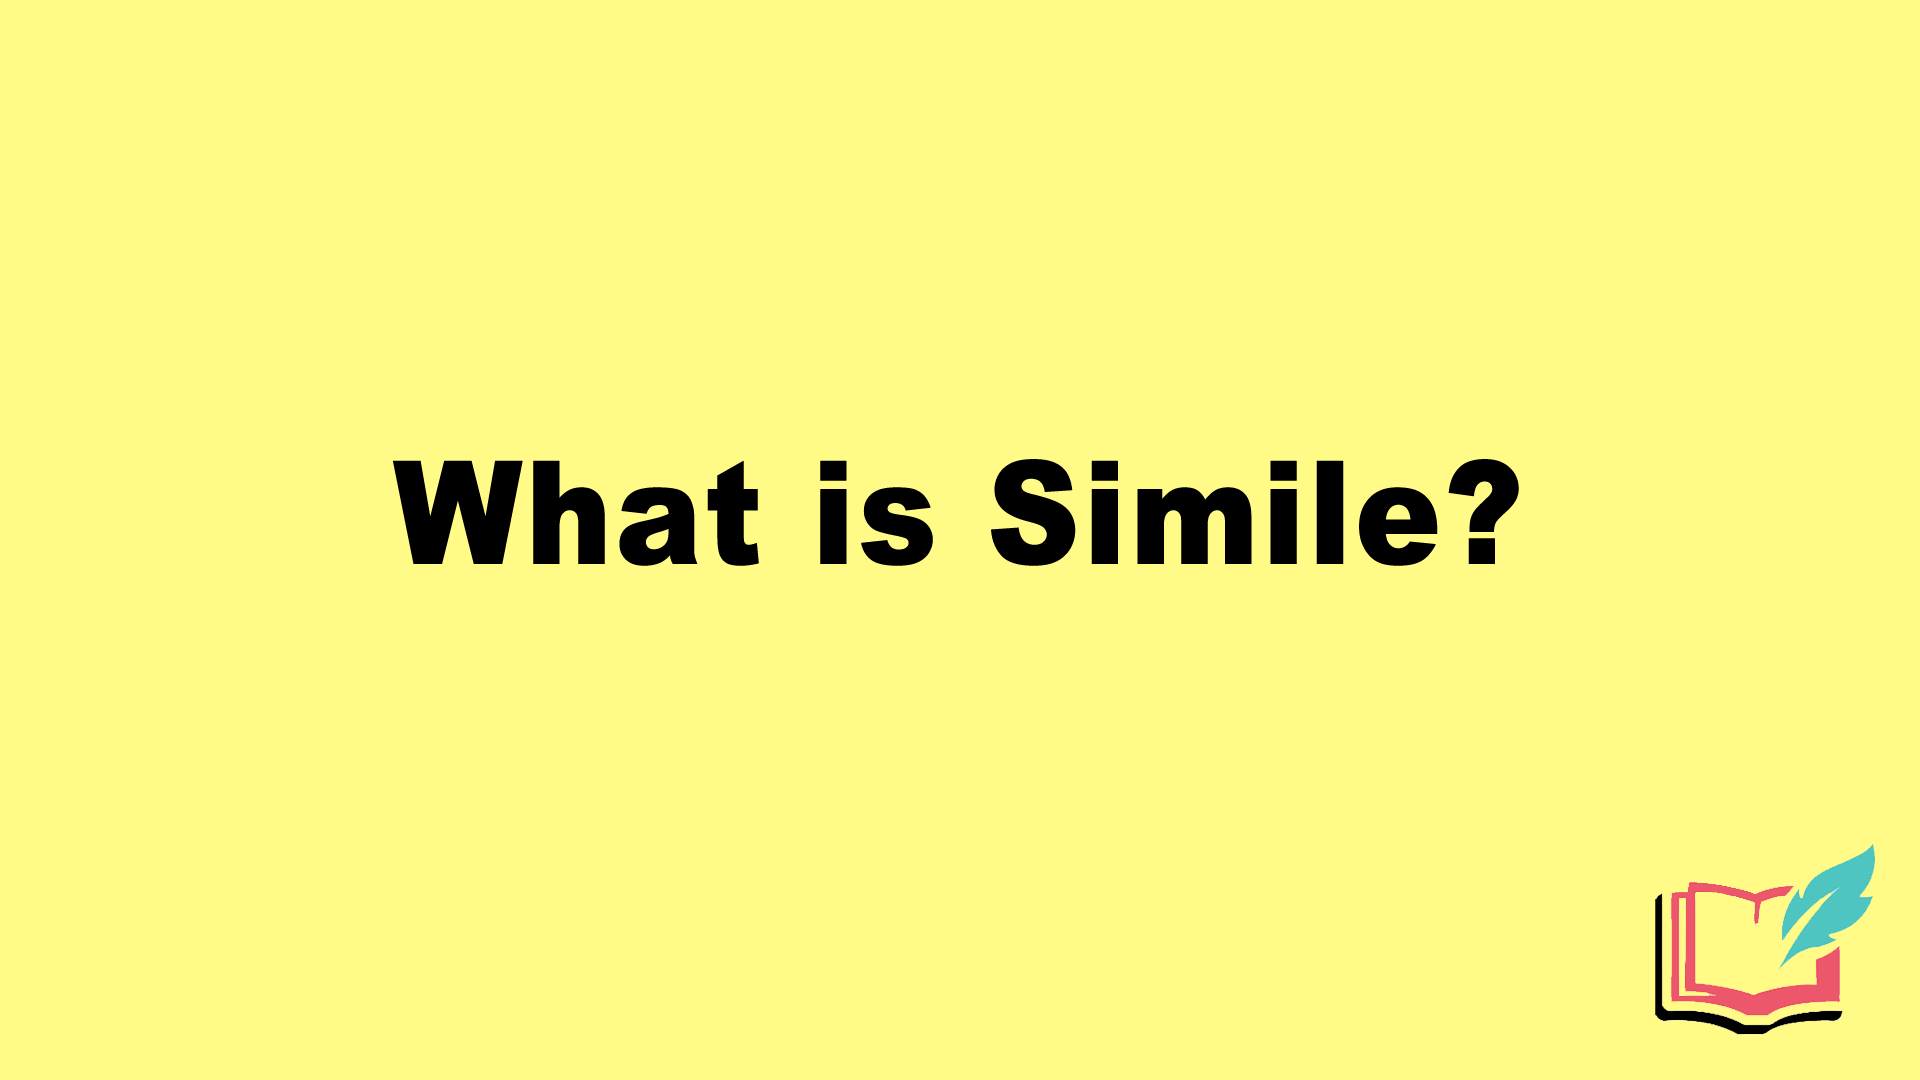 simile meaning